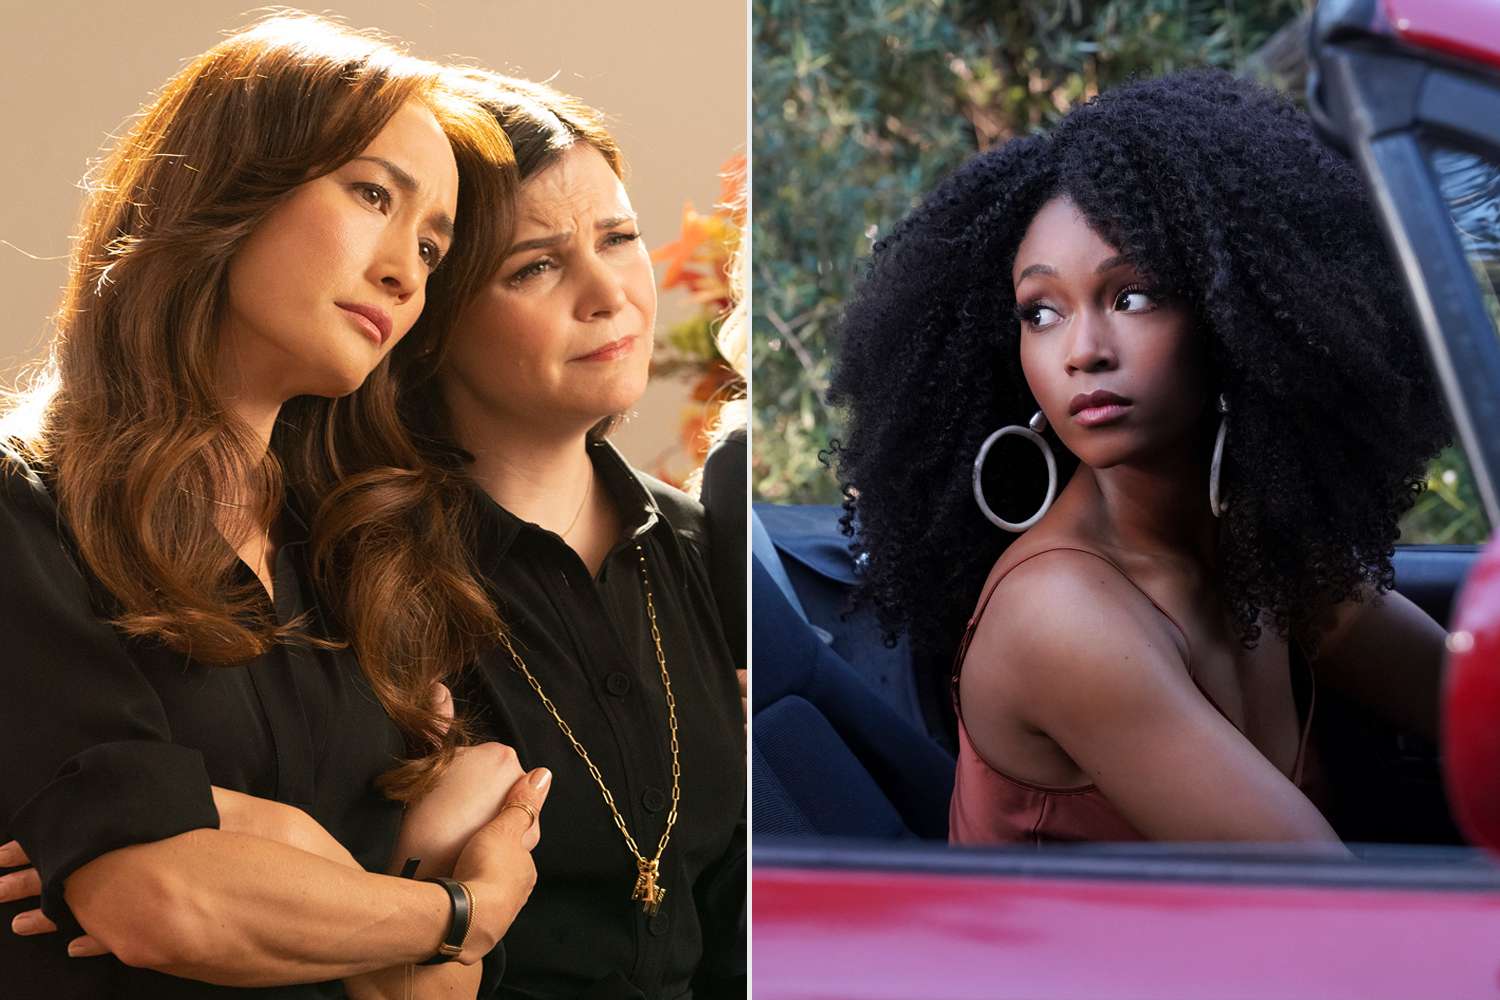 PIVOTING: L-R: Maggie Q, Ginnifer Goodwin and Eliza Coupe in the “My Friend Died” series premiere episode of PIVOTING airing Sunday, Jan. 9 on FOX. © 2022 FOX Media LLC. CR: FOX.; OUR KIND OF PEOPLE: Yaya DaCosta in OUR KIND OF PEOPLE premiering Tuesday, Sept. 21 (9:00-10:00 PM ET/PT) on FOX. ©2021 FOX MEDIA LLC. Cr: Michael Becker/FOX.